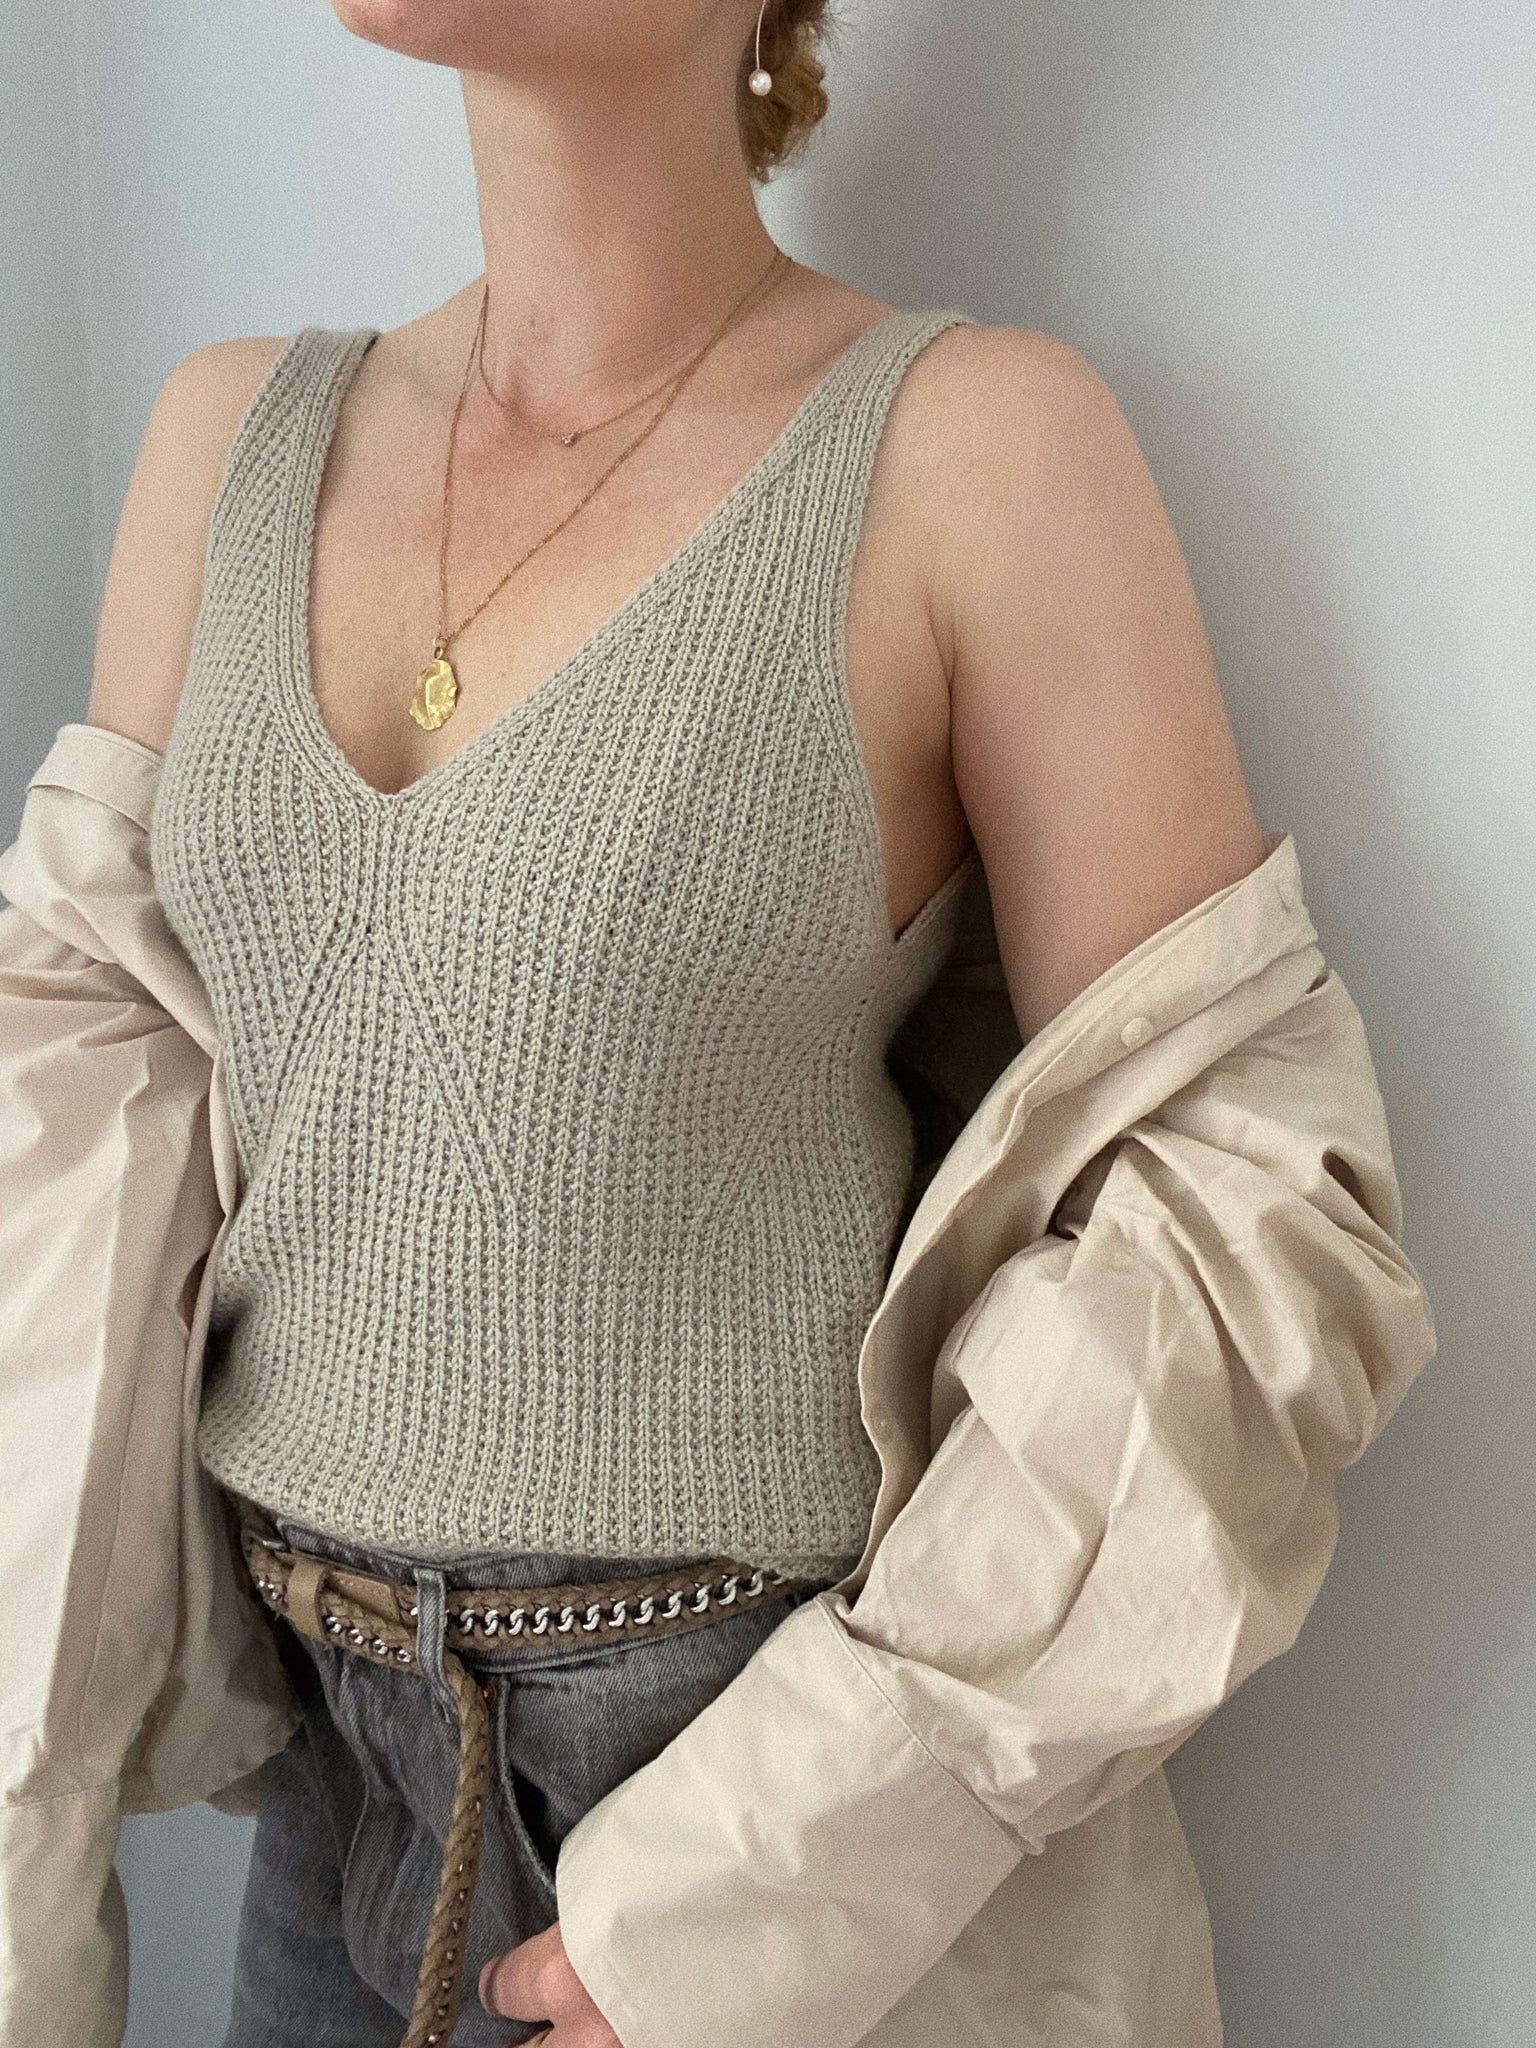 Camisole No. 7 My Favourite Things Knitwear - Strikkekit